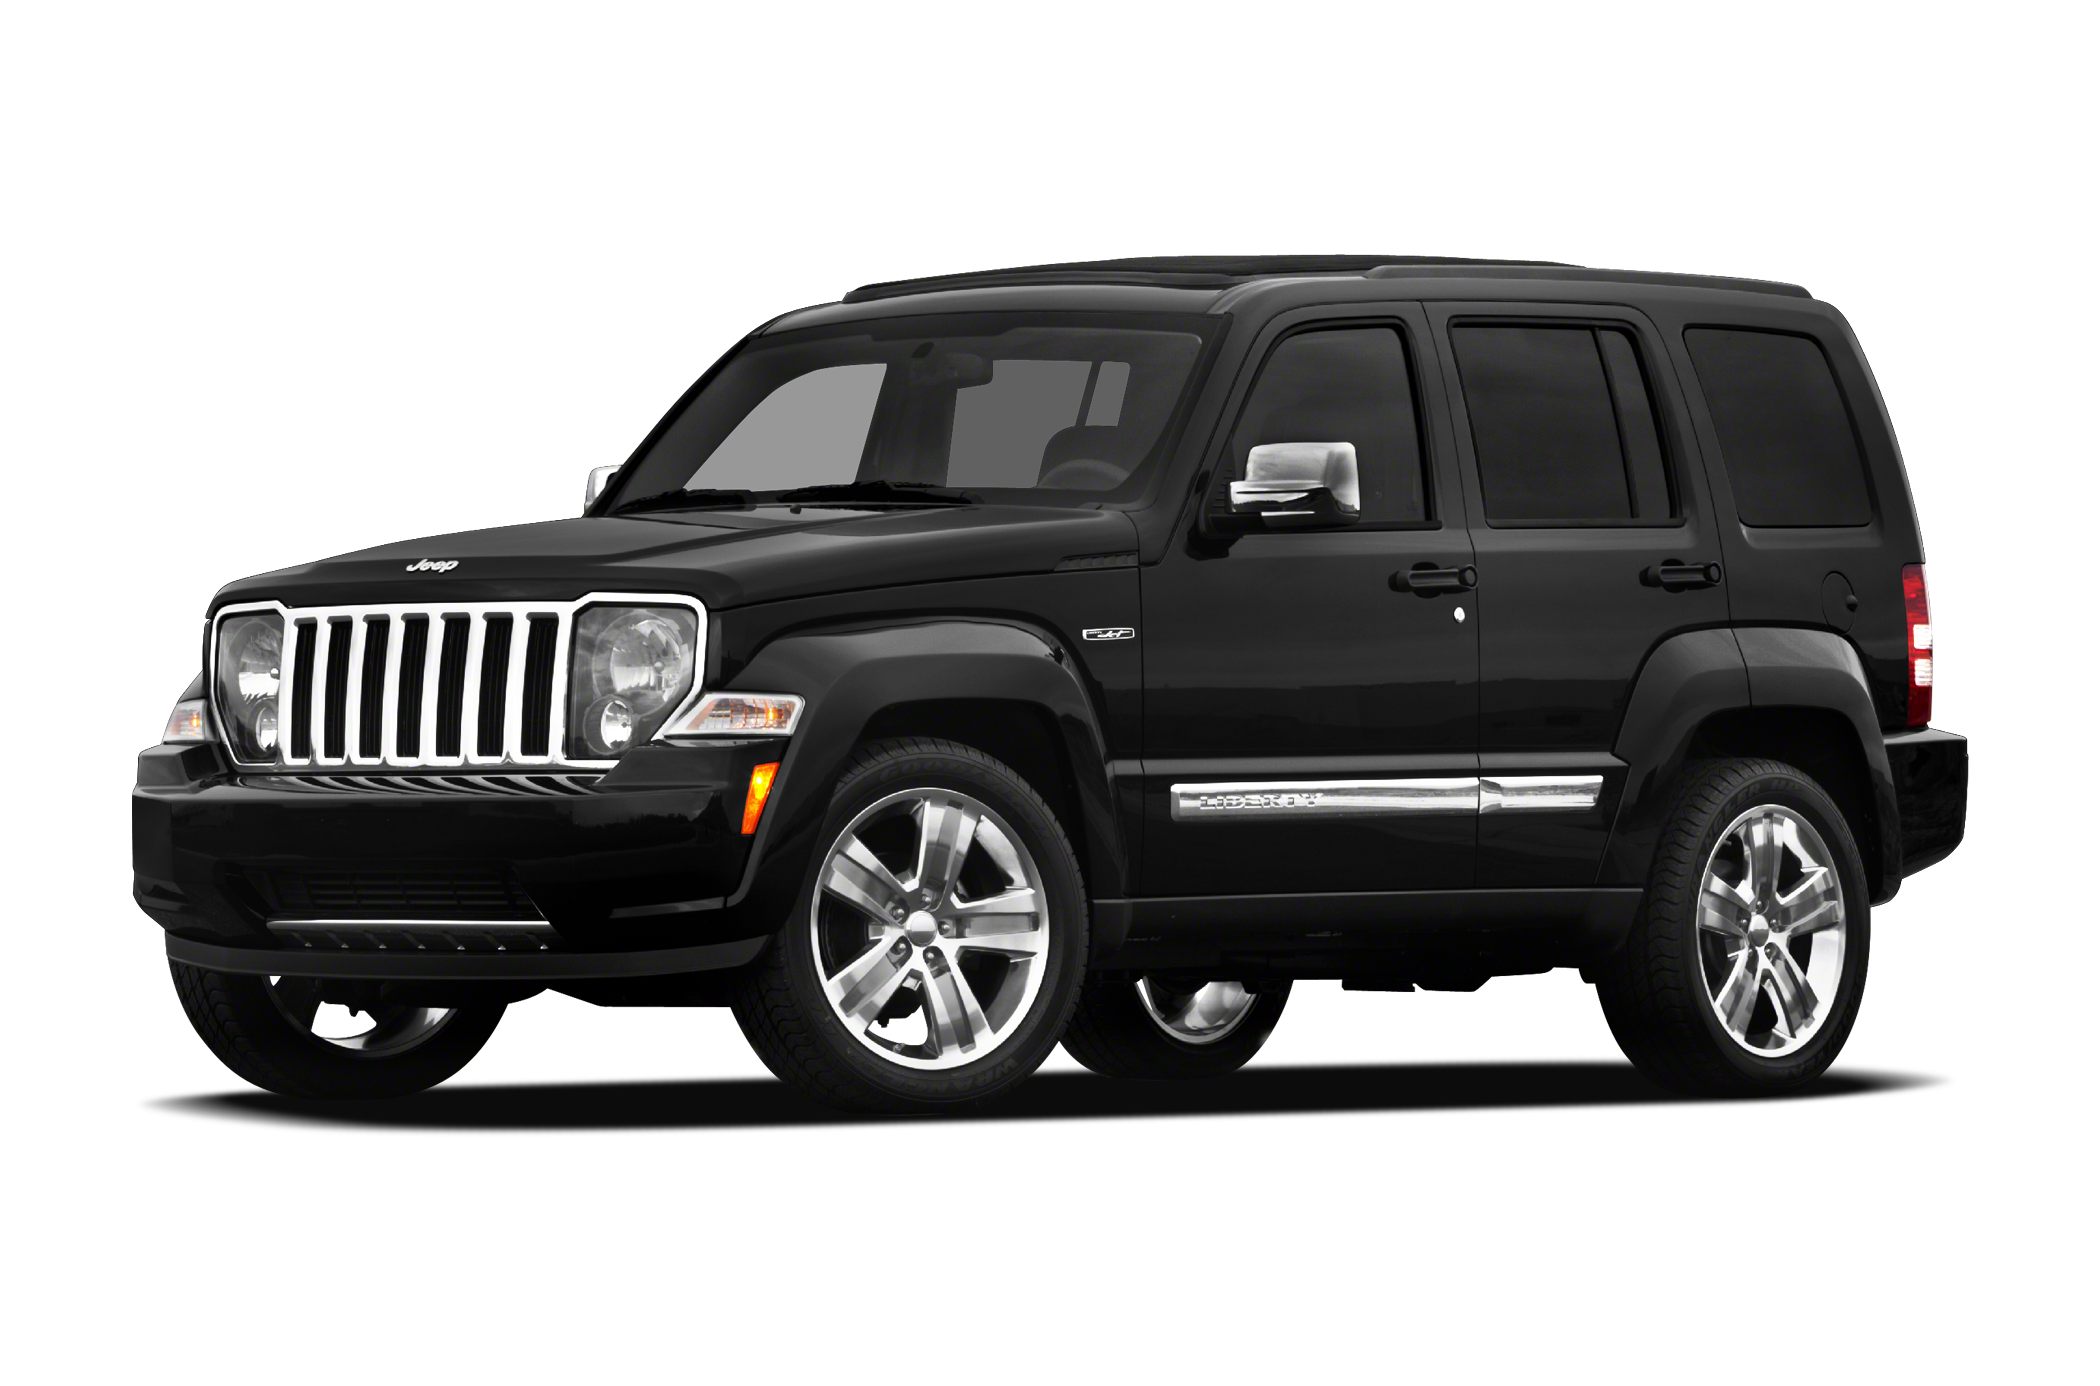 2012 Jeep Liberty oem parts and accessories on sale